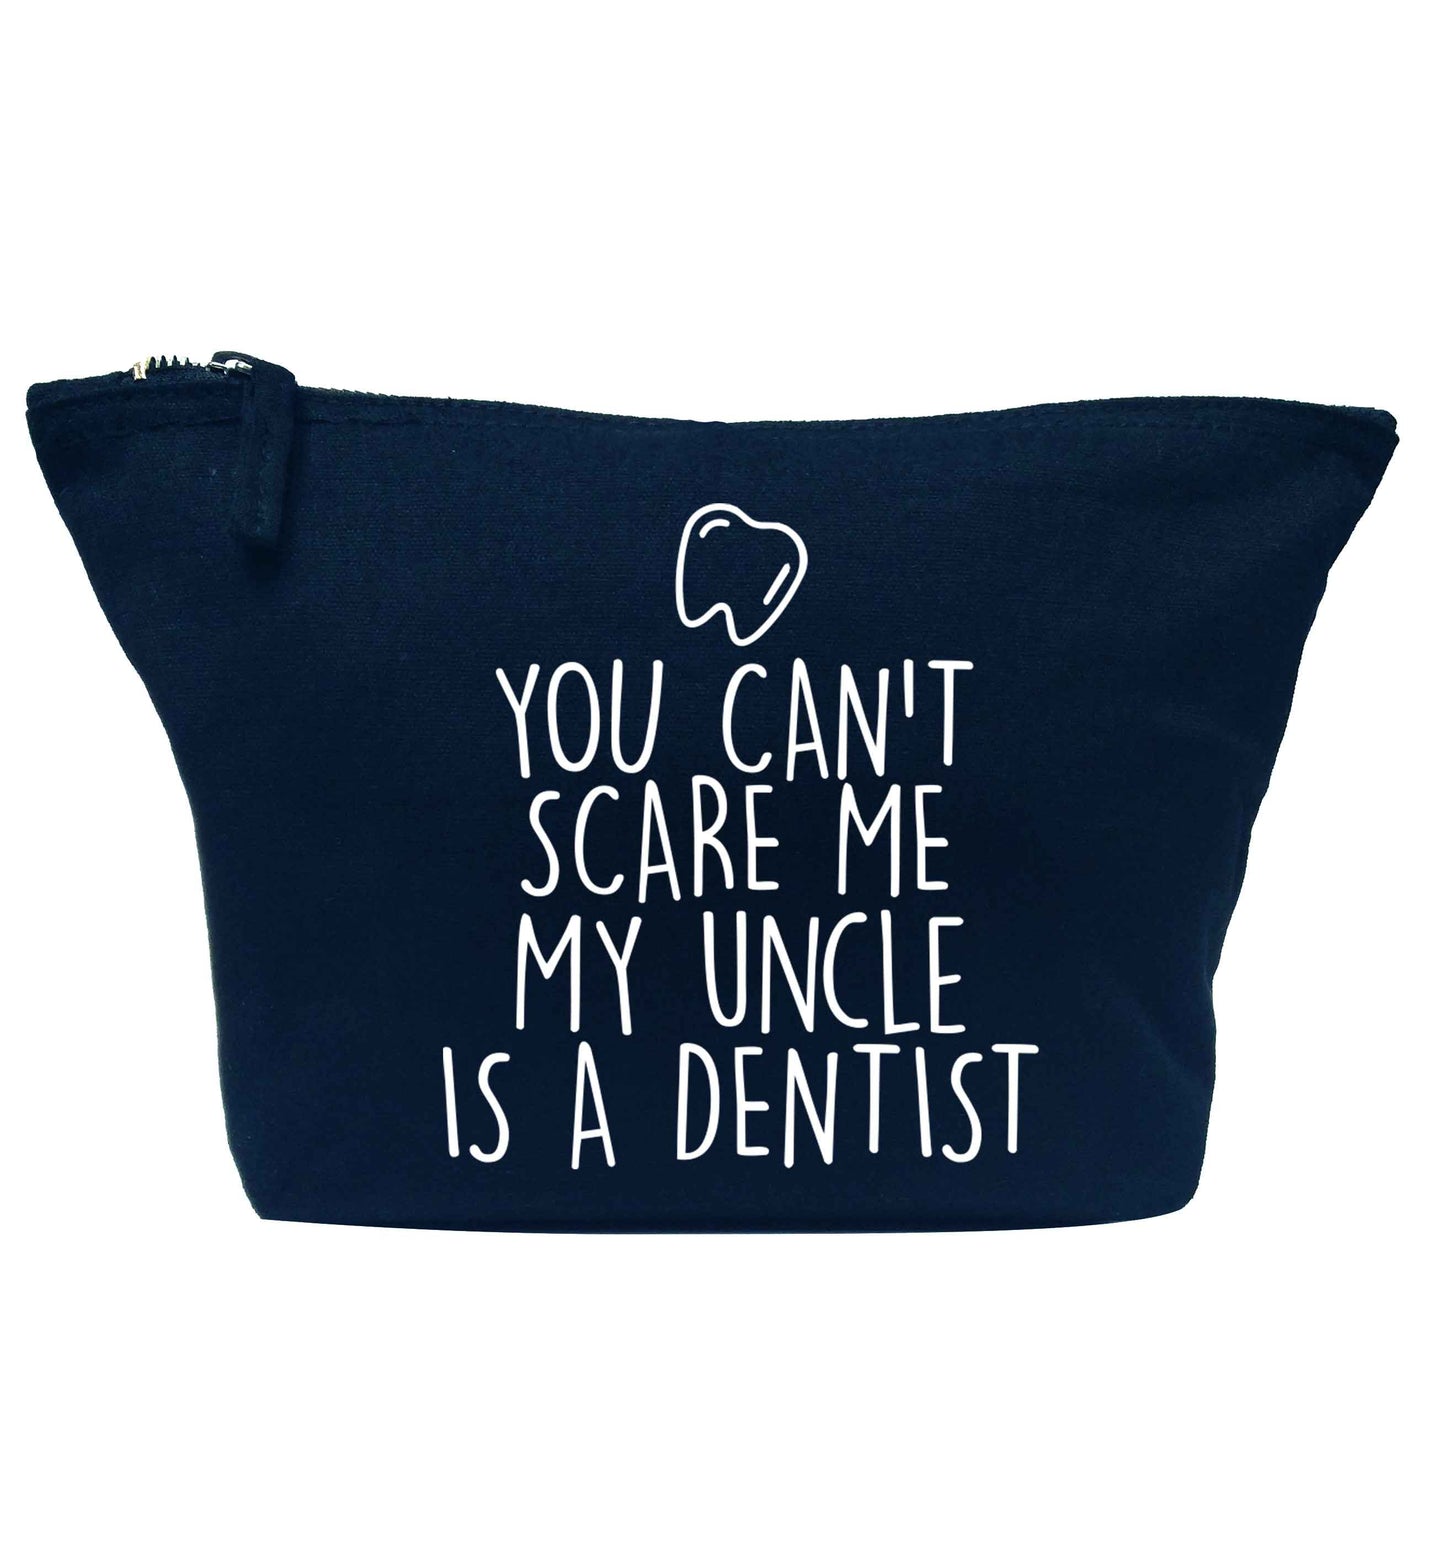 You can't scare me my uncle is a dentist navy makeup bag